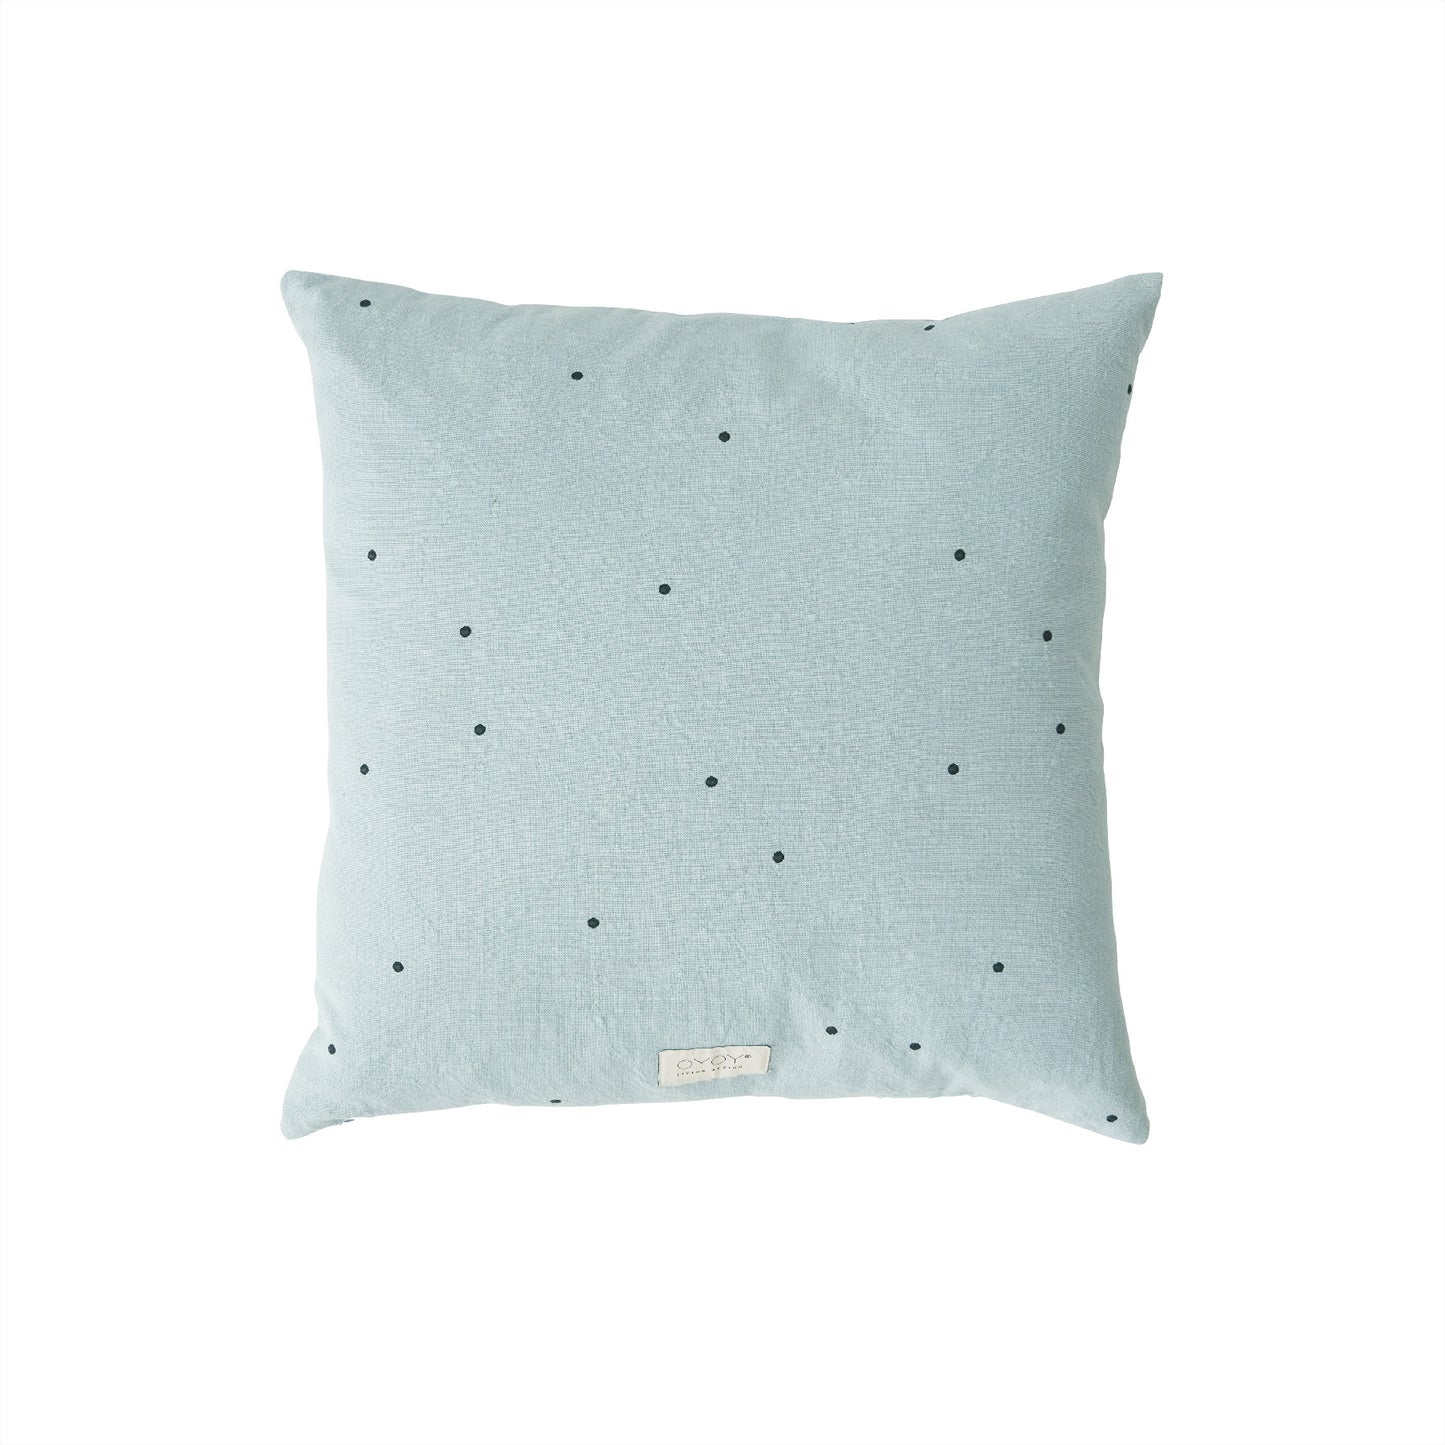 Laad afbeelding in Galerijviewer, OYOY LIVING Kyoto Dot Cushion Cover Square Cushion Cover 608 Dusty Blue
